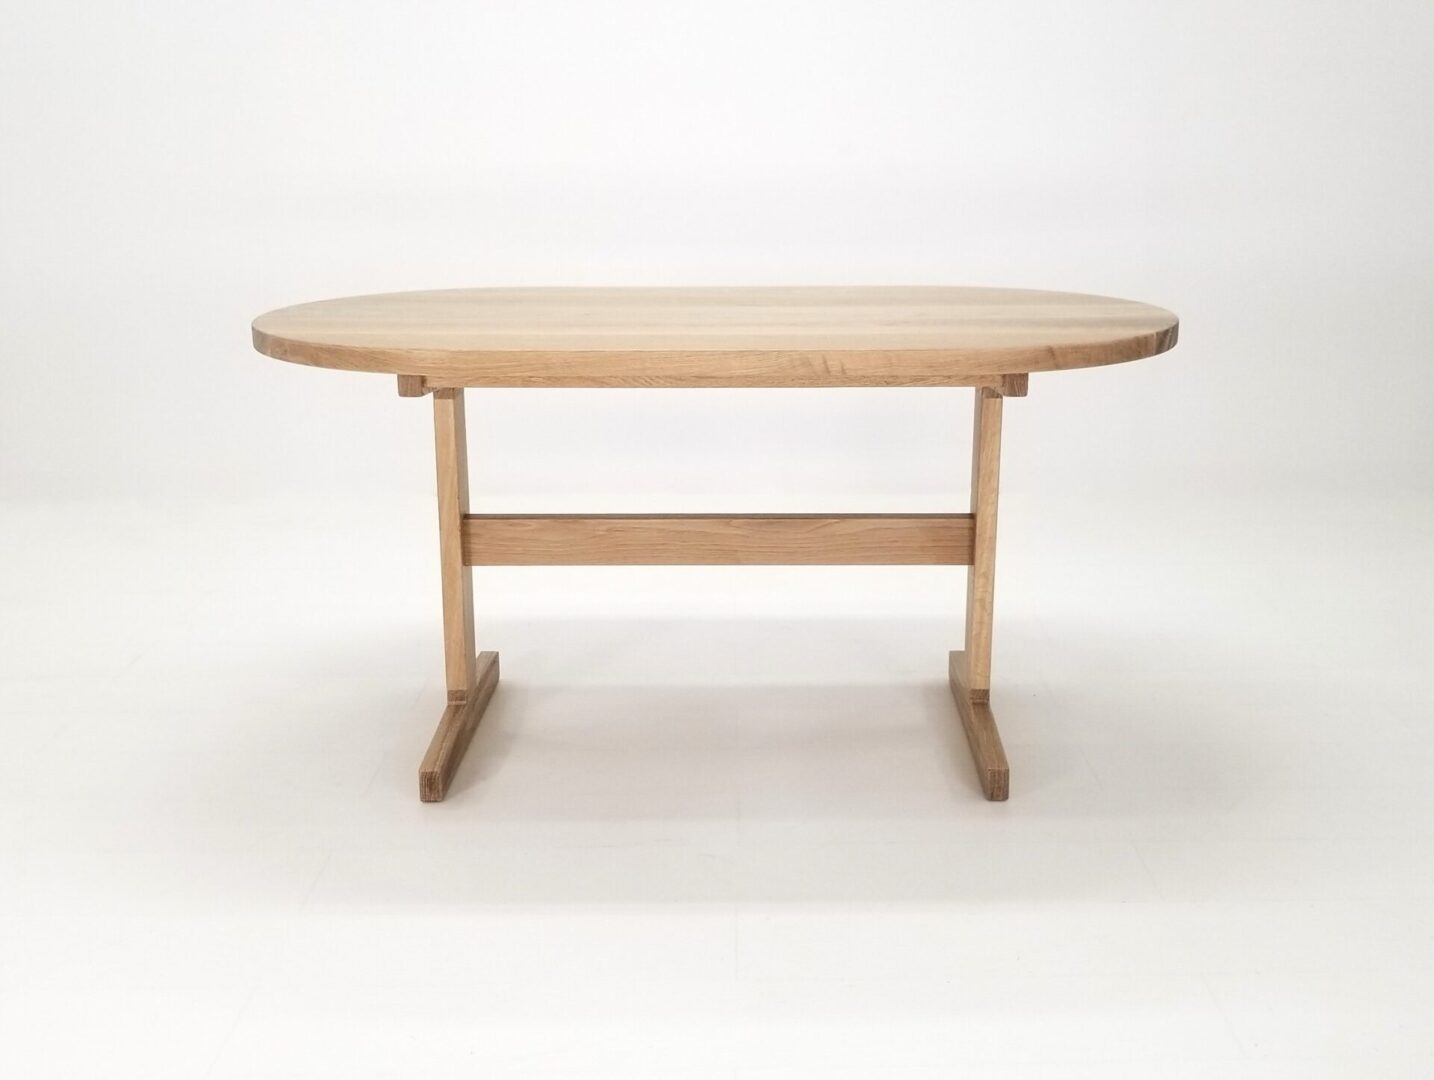 A oval top trestle dining table with a round top and two legs.